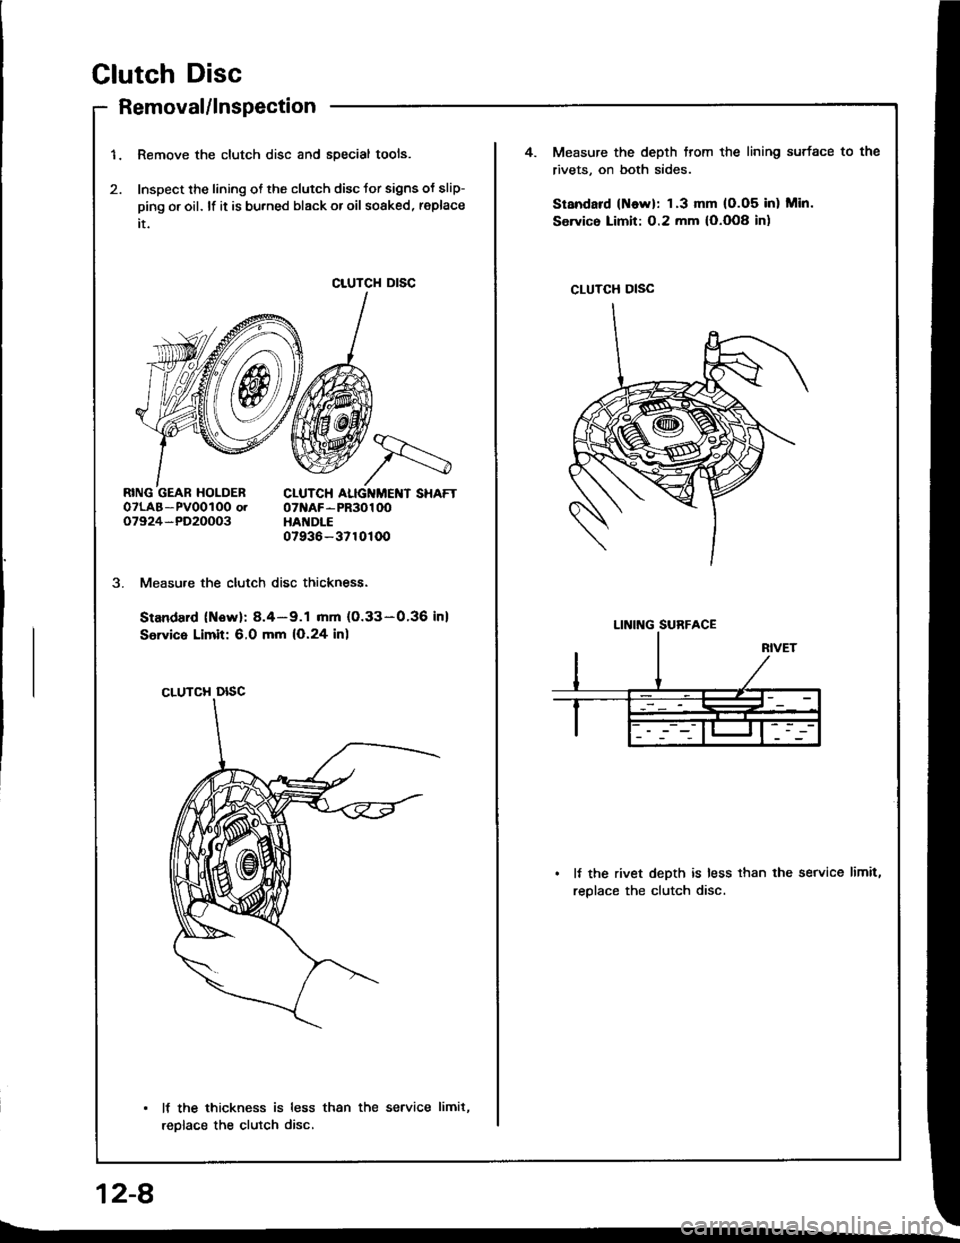 ACURA INTEGRA 1994  Service Repair Manual Glutch Disc
1.Remove the clutch disc and special tools.
Inspect the lining of the clutch disc Jor signs oJ slip-
ping o. oil. lf it is bu.ned black or oil soaked, replace
it.
Measure the depth trom t